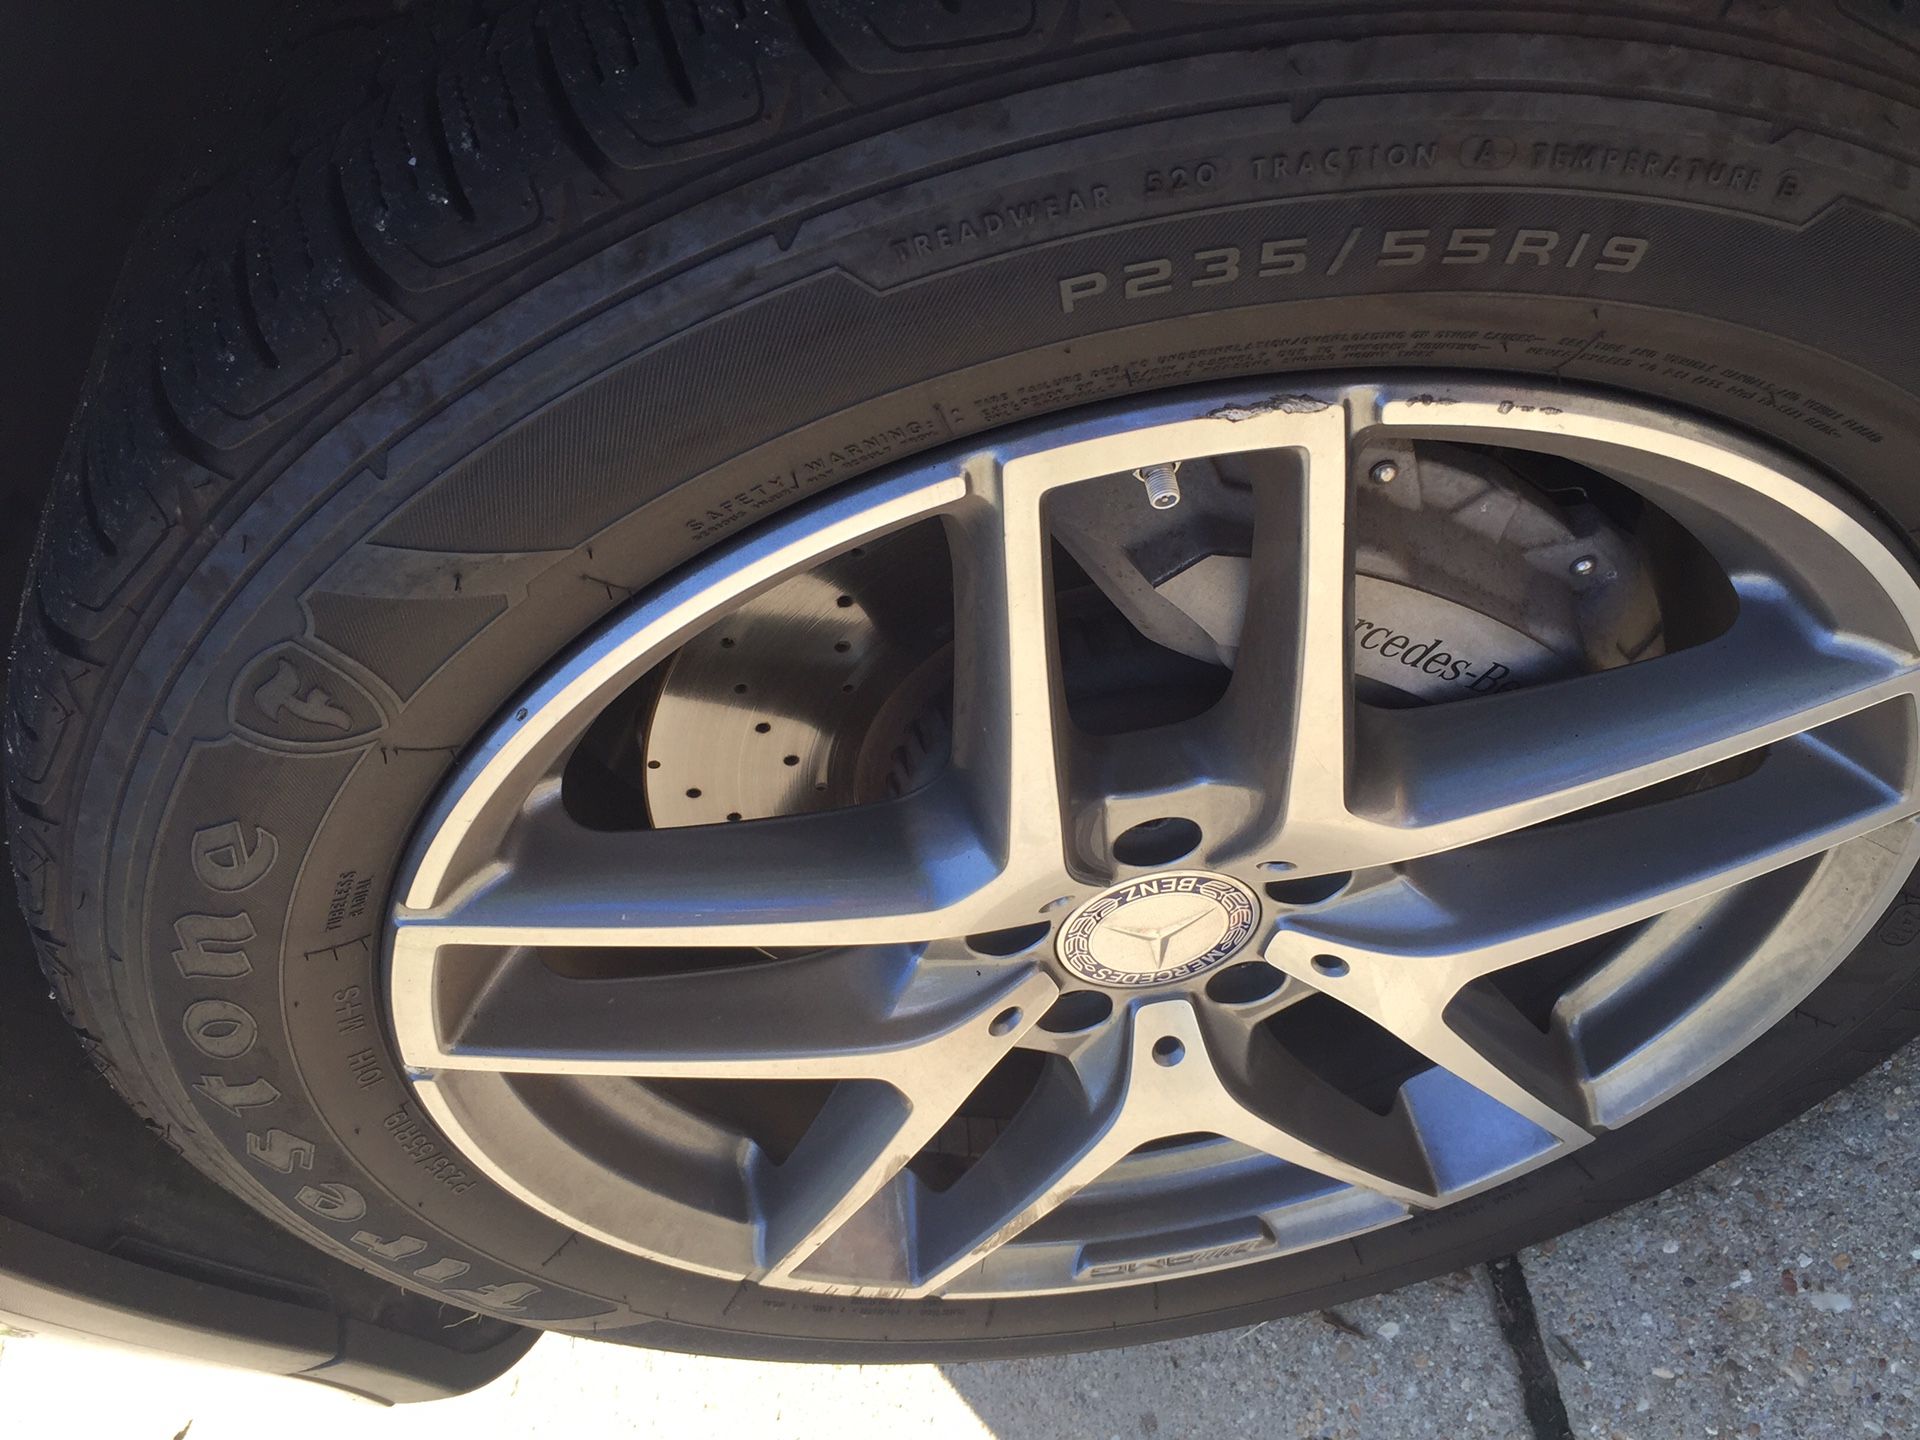 4 used tires barely worn. Firestone p235/55R19. Price is for Tires only. Rims are not included.